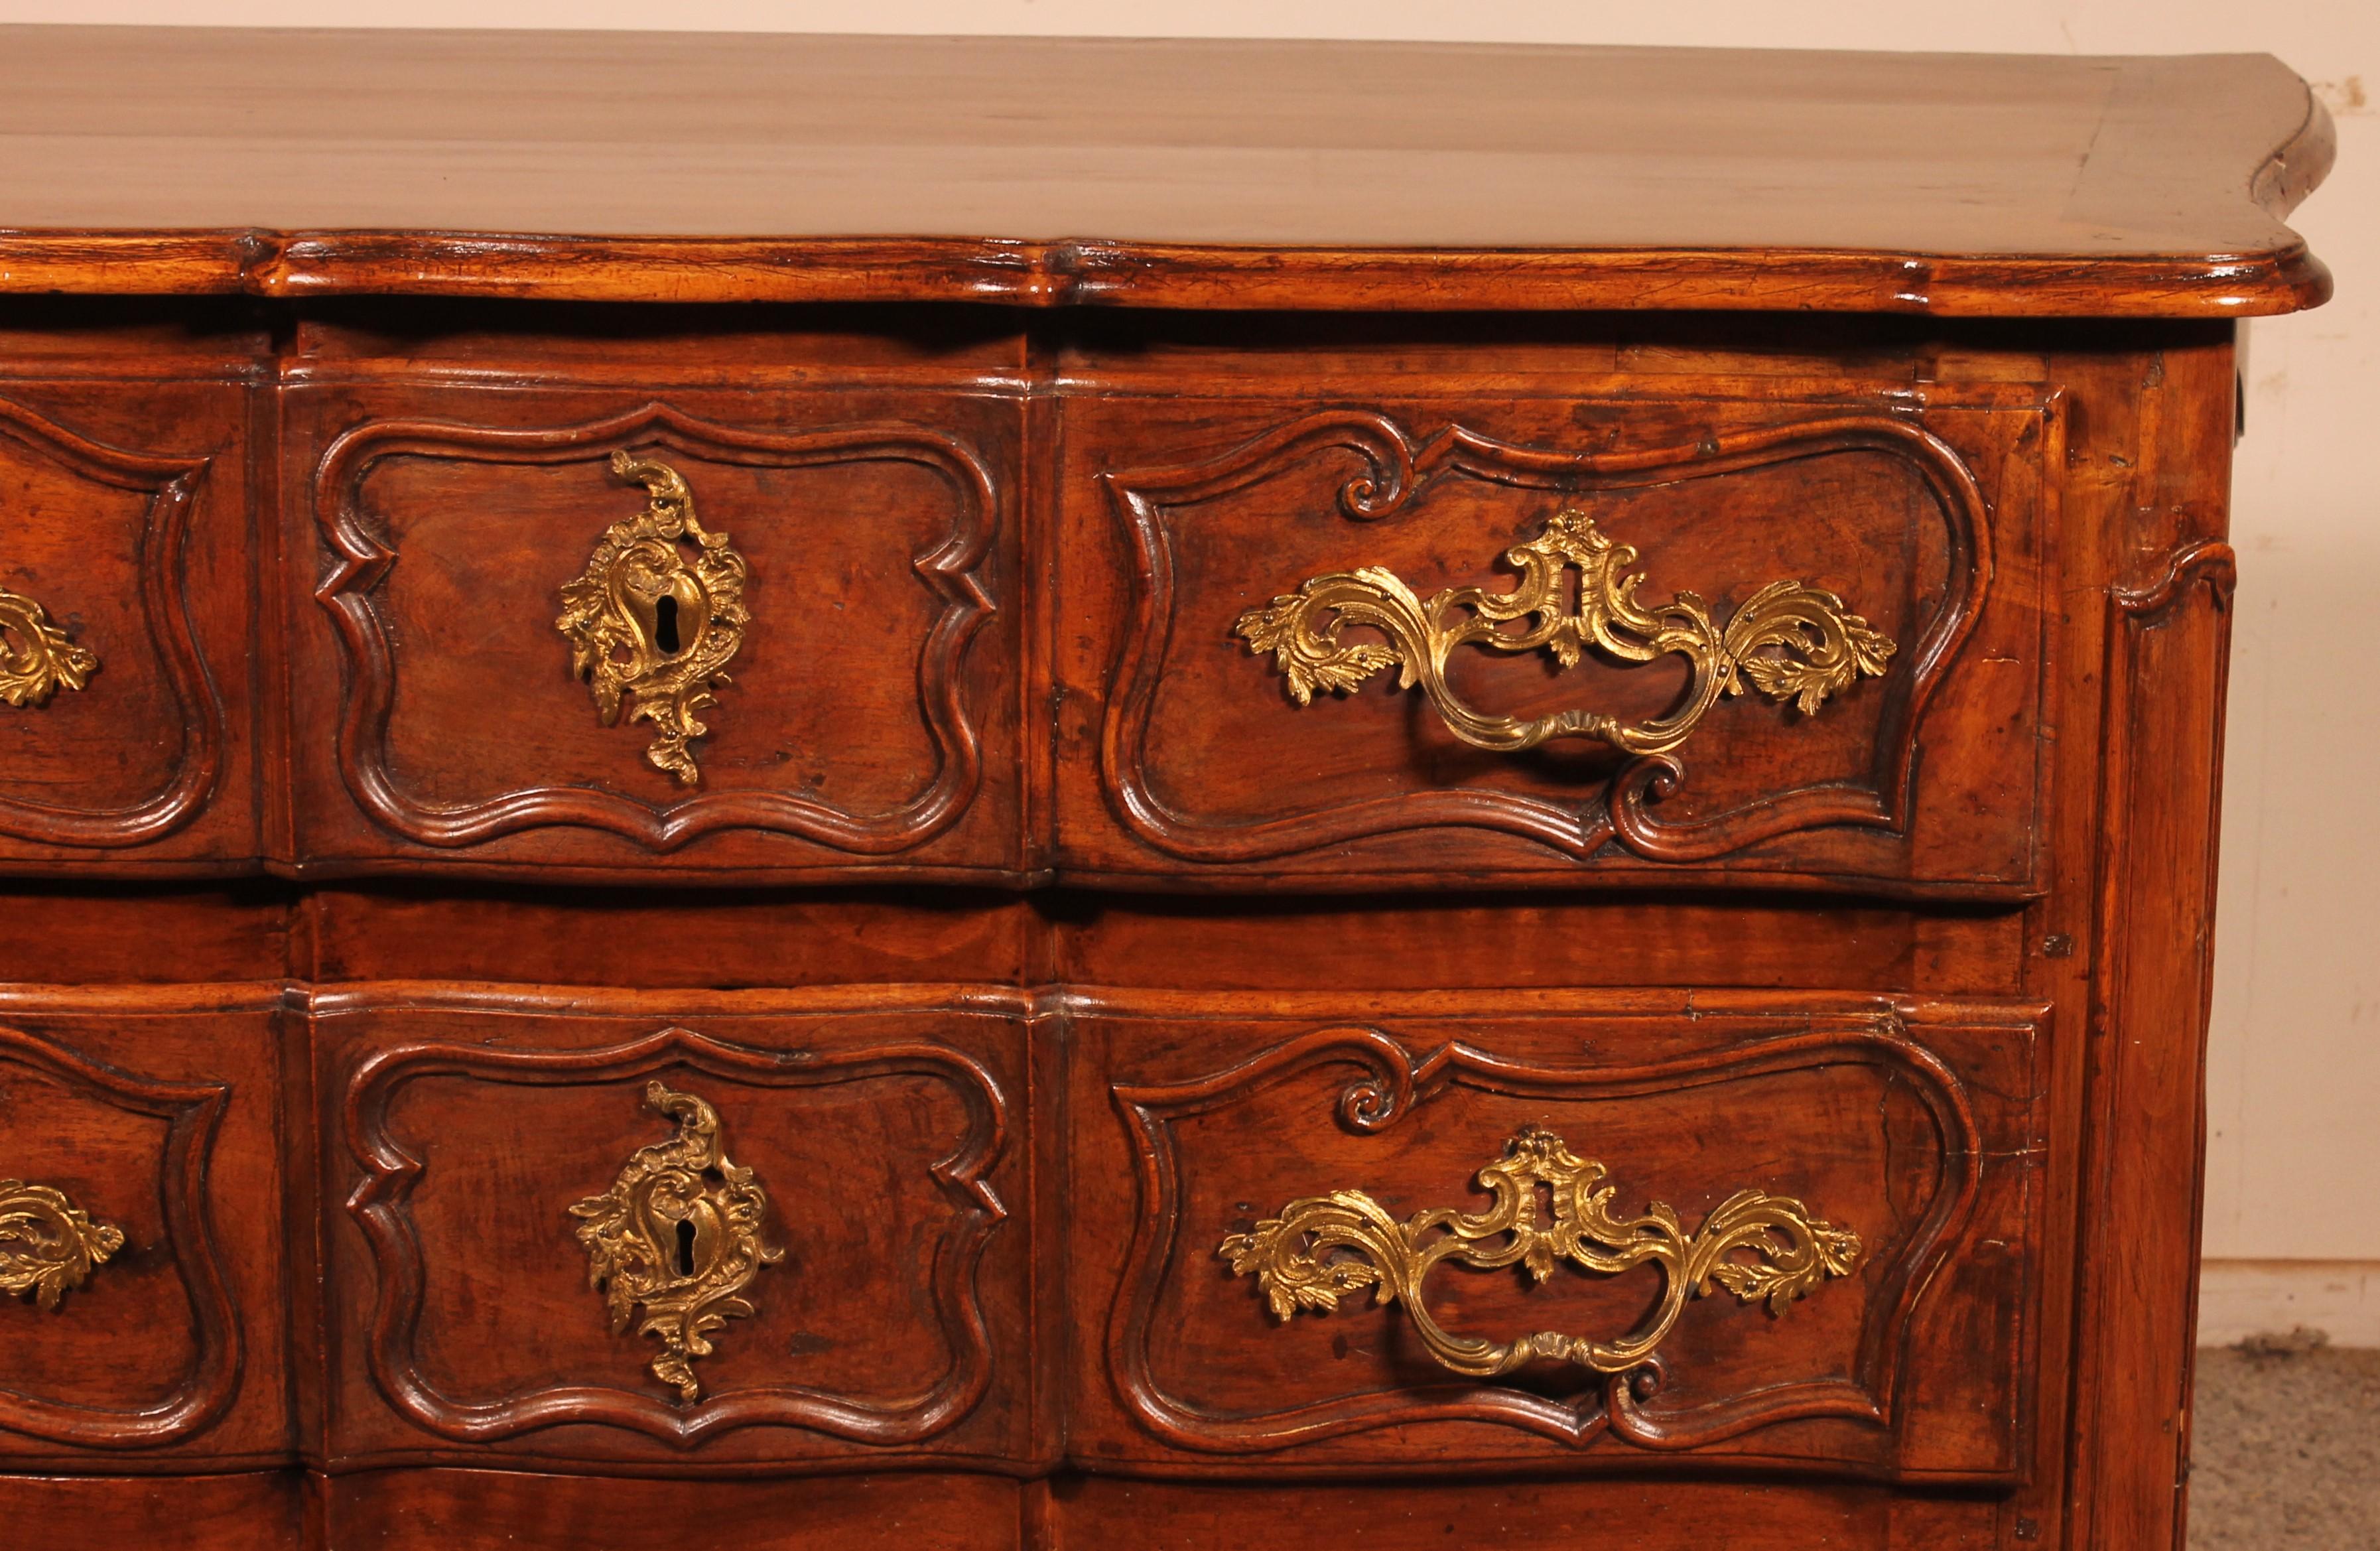 Magnificent crossbow chest of drawers in walnut from the 18th century - Bourgogne (Lyon) Louis XV

Very beautiful crossbow chest of drawers curved on its sides which is unusual and very elegant and rare
Superb molding work on the